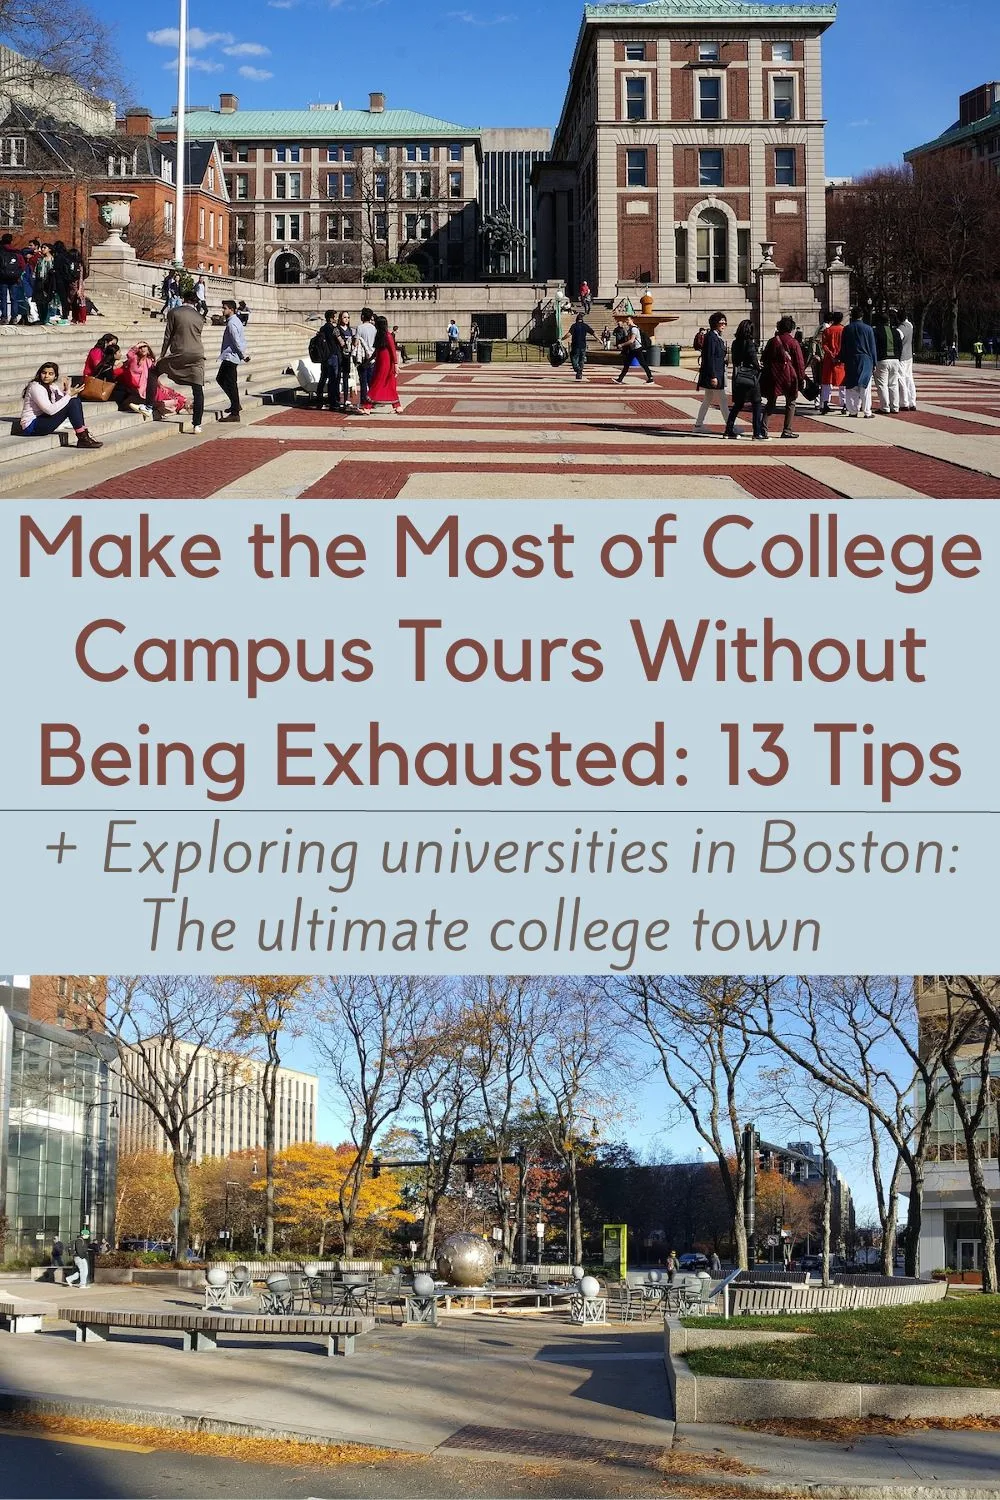 college campus tours take time and cost money. here are 13 tips to make the most of these visits. plus, how to organize a tour of boston colleges. 